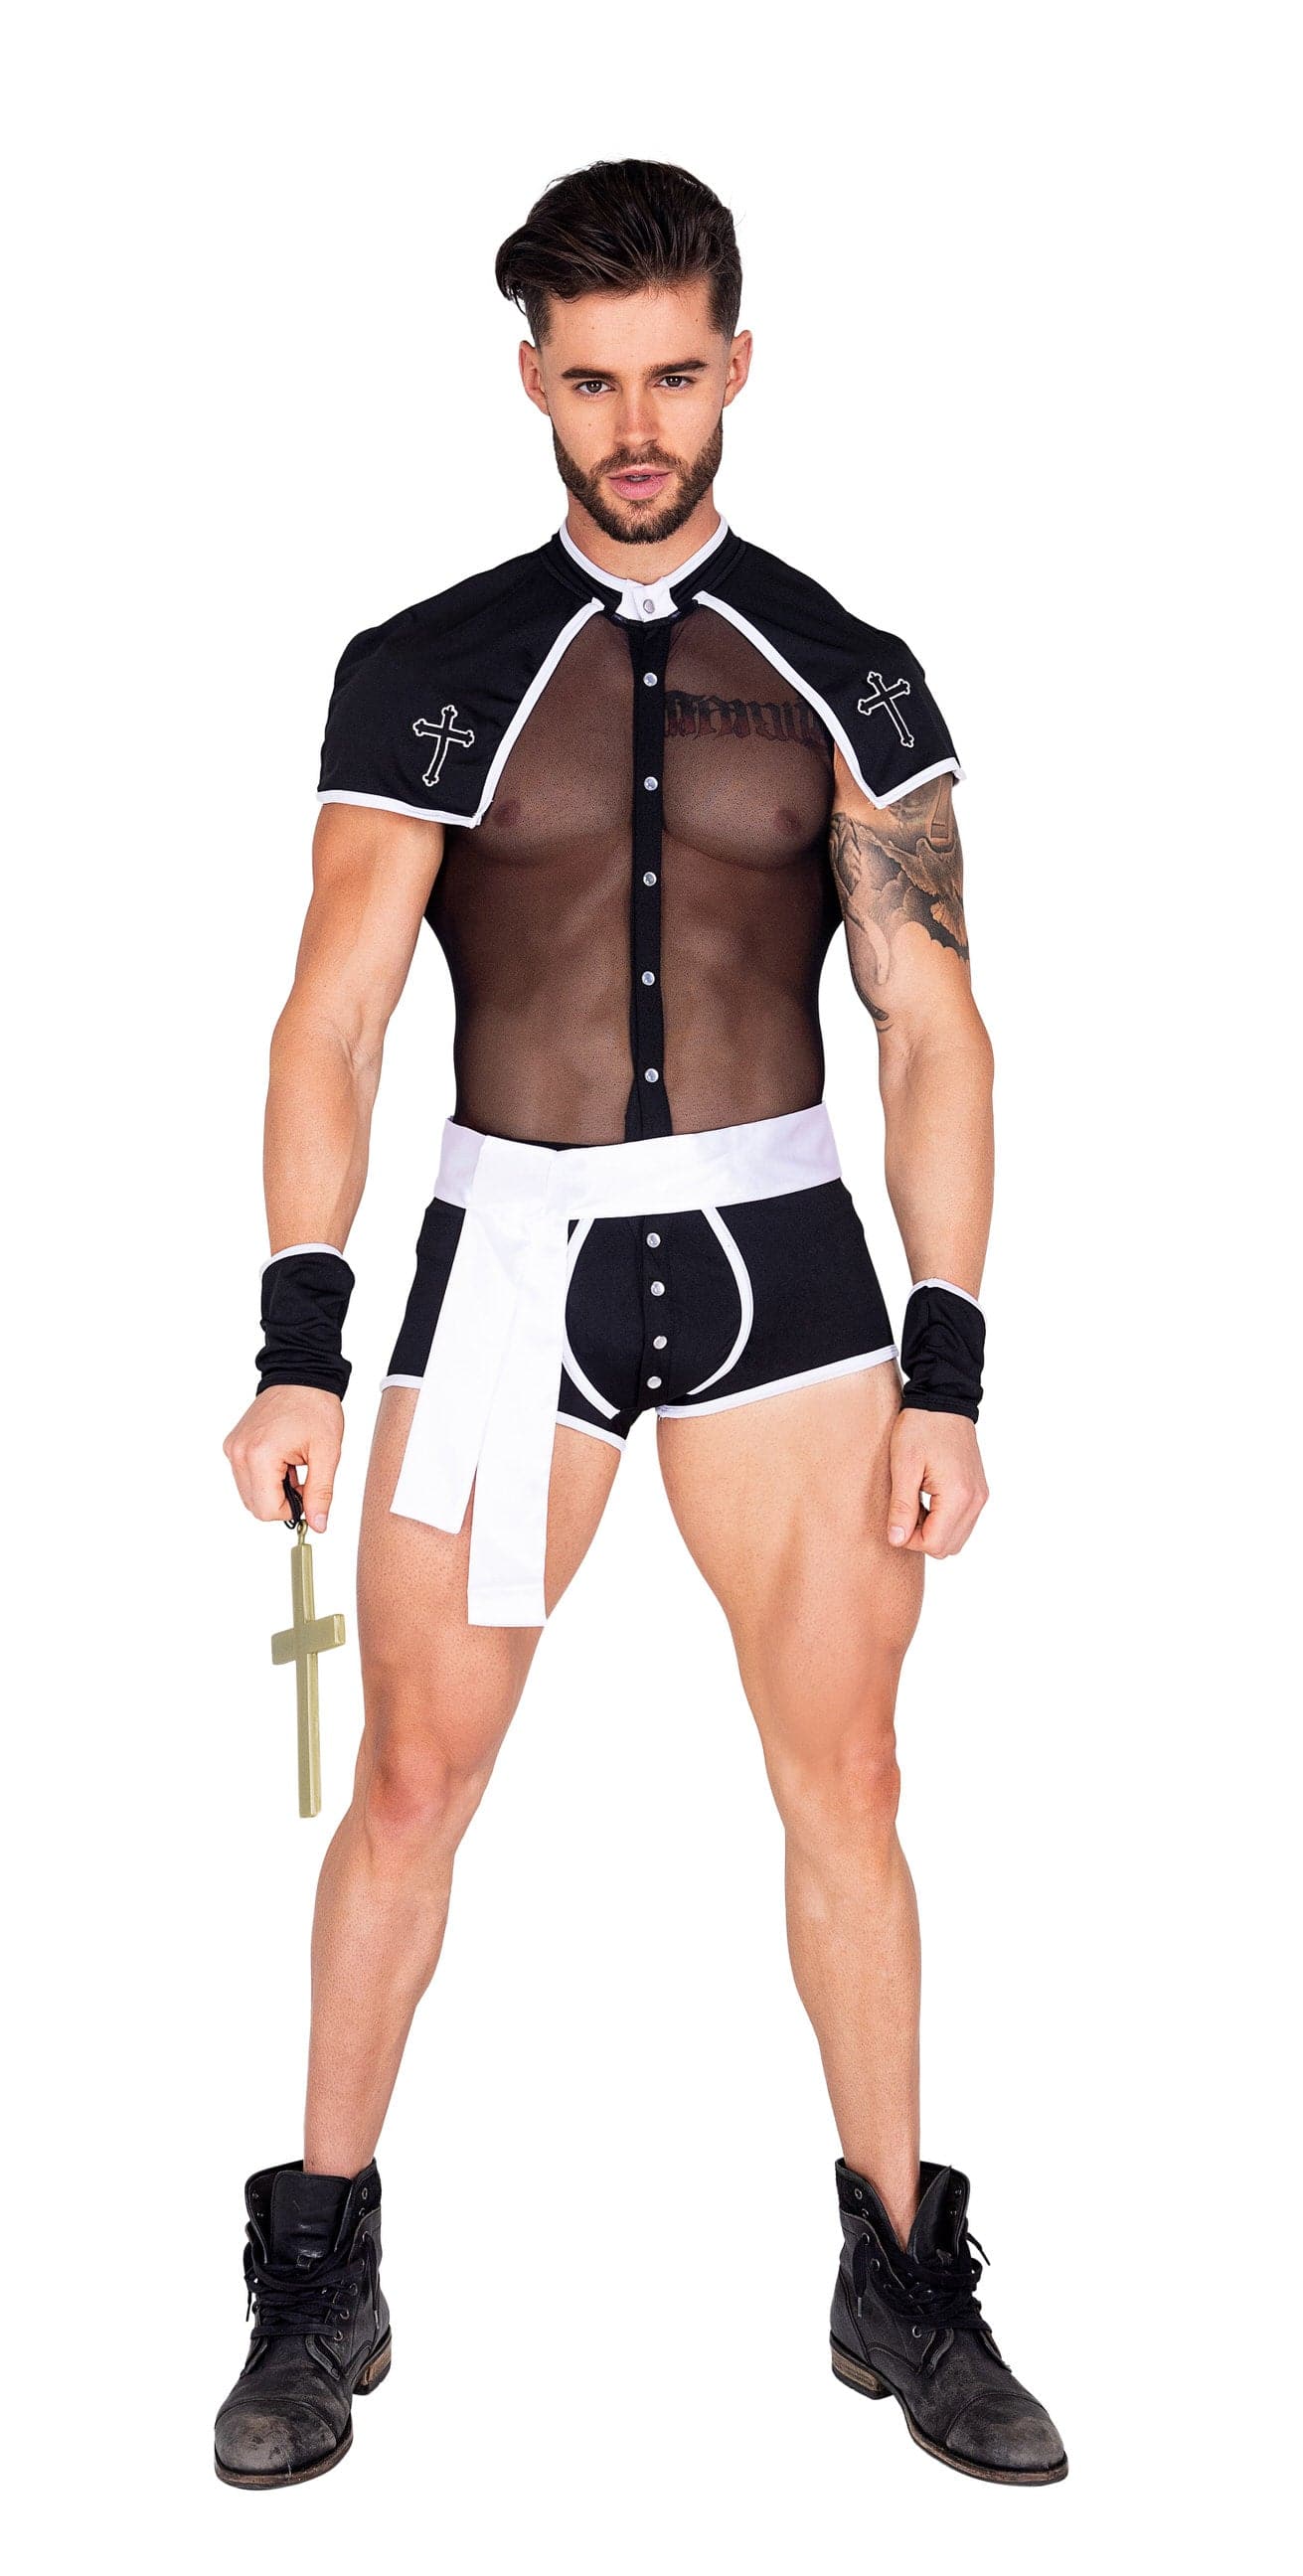 3pc. Sinful Confession Men's Costume - For Love of Lingerie